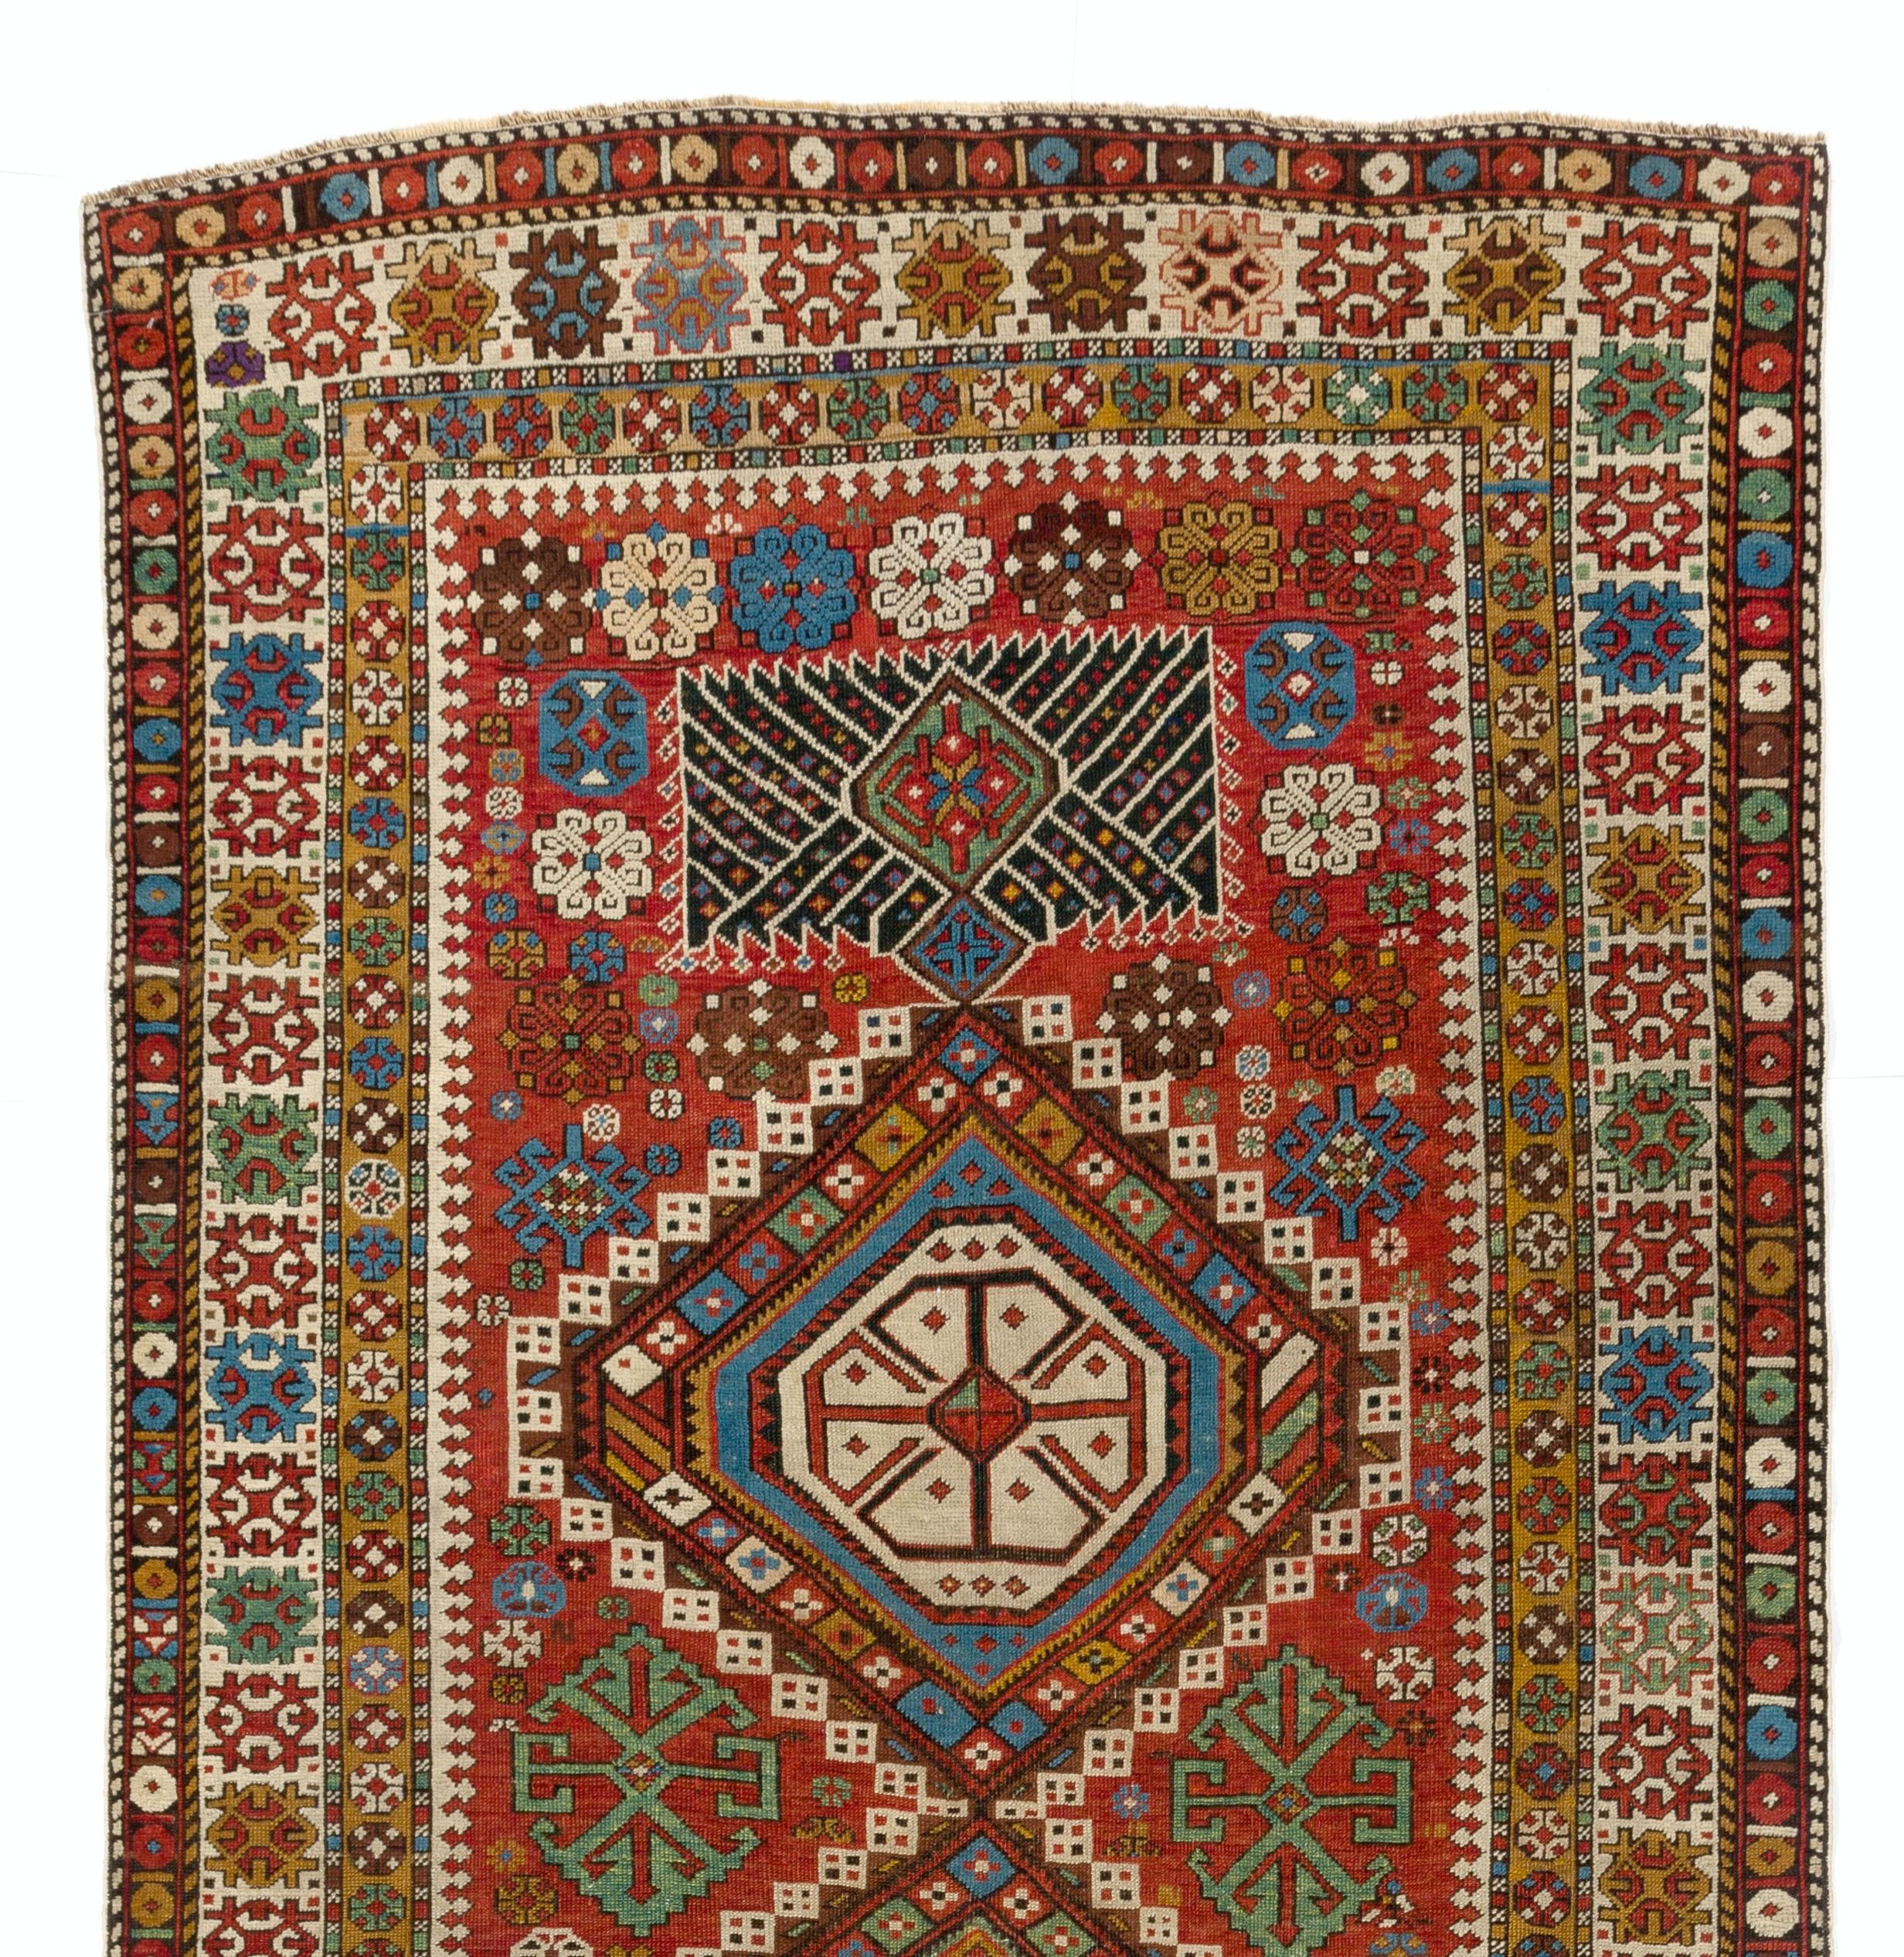 Antique Caucasian Shirvan rug, circa 1875. 
The rug has medium wool pile on wool foundation. It is in very good condition and professionally cleaned.